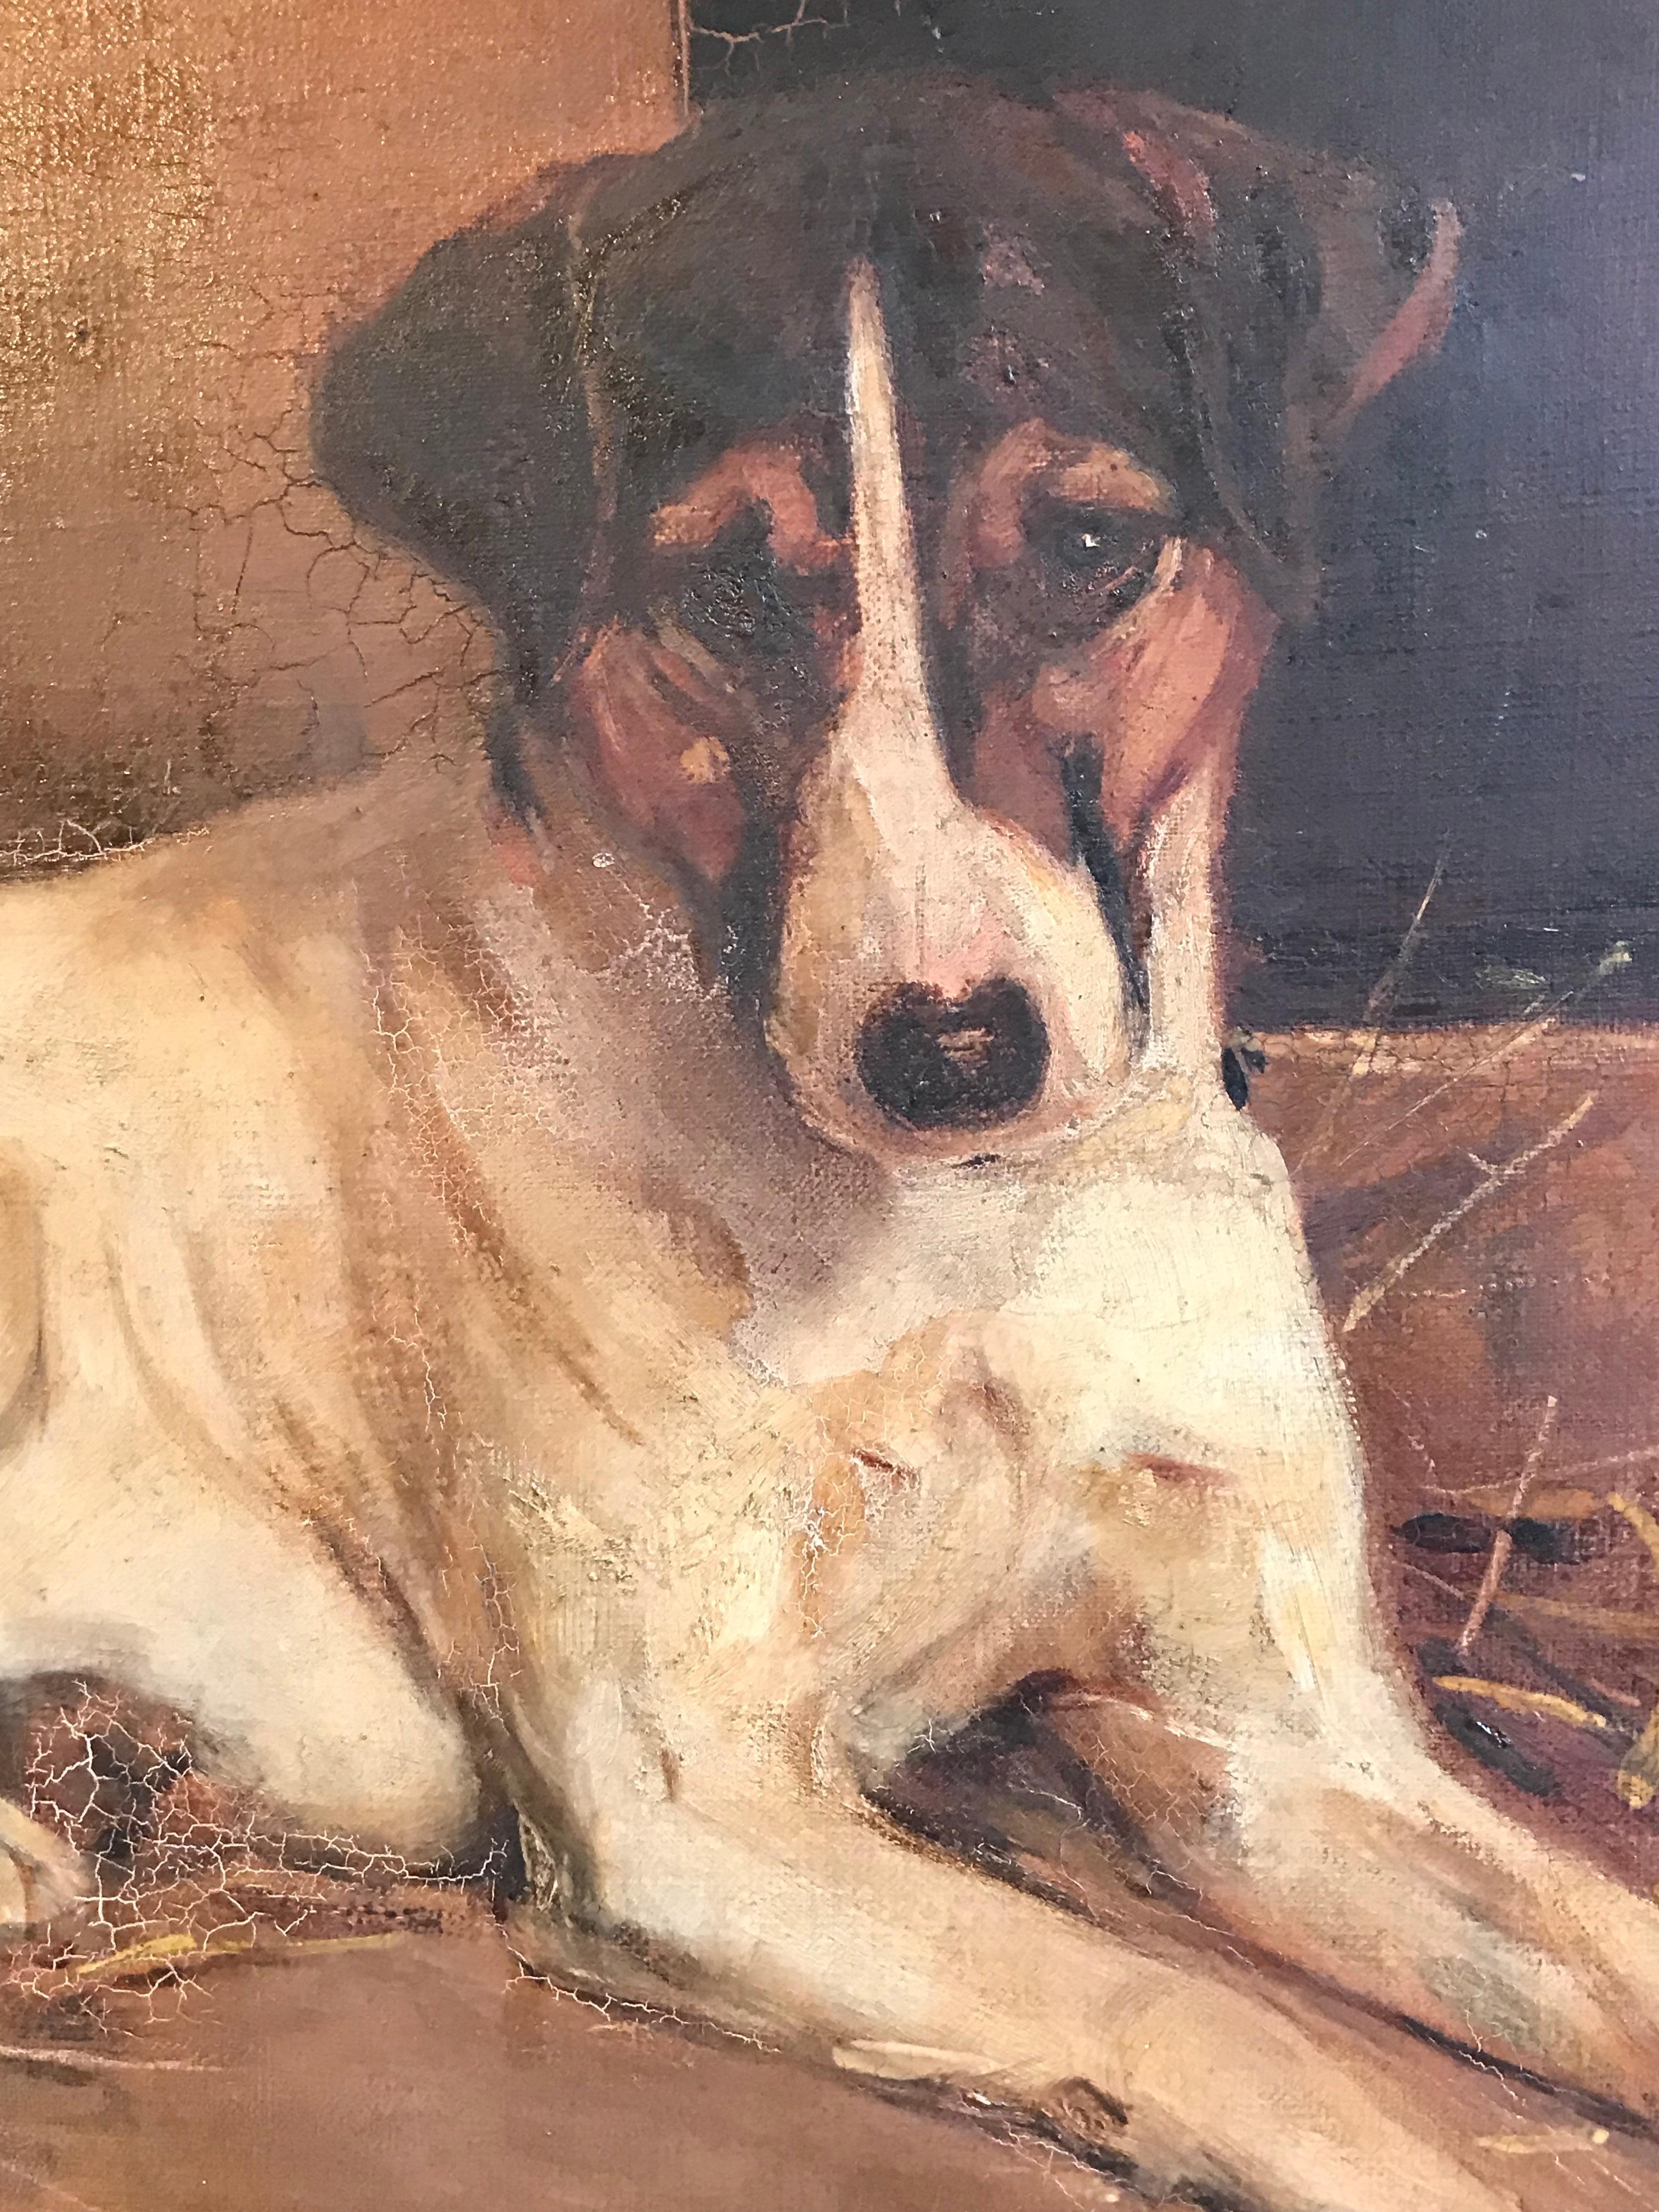 The Jack Russell Terrier
by Samuel Fulton (British, 1848-1930)
signed, lower left corner
oil painting on canvas, framed
canvas: 14 x 18.5 inches
framed: 17 x 21.5 inches
provenance: private collection, London

Very fine original British dog painting